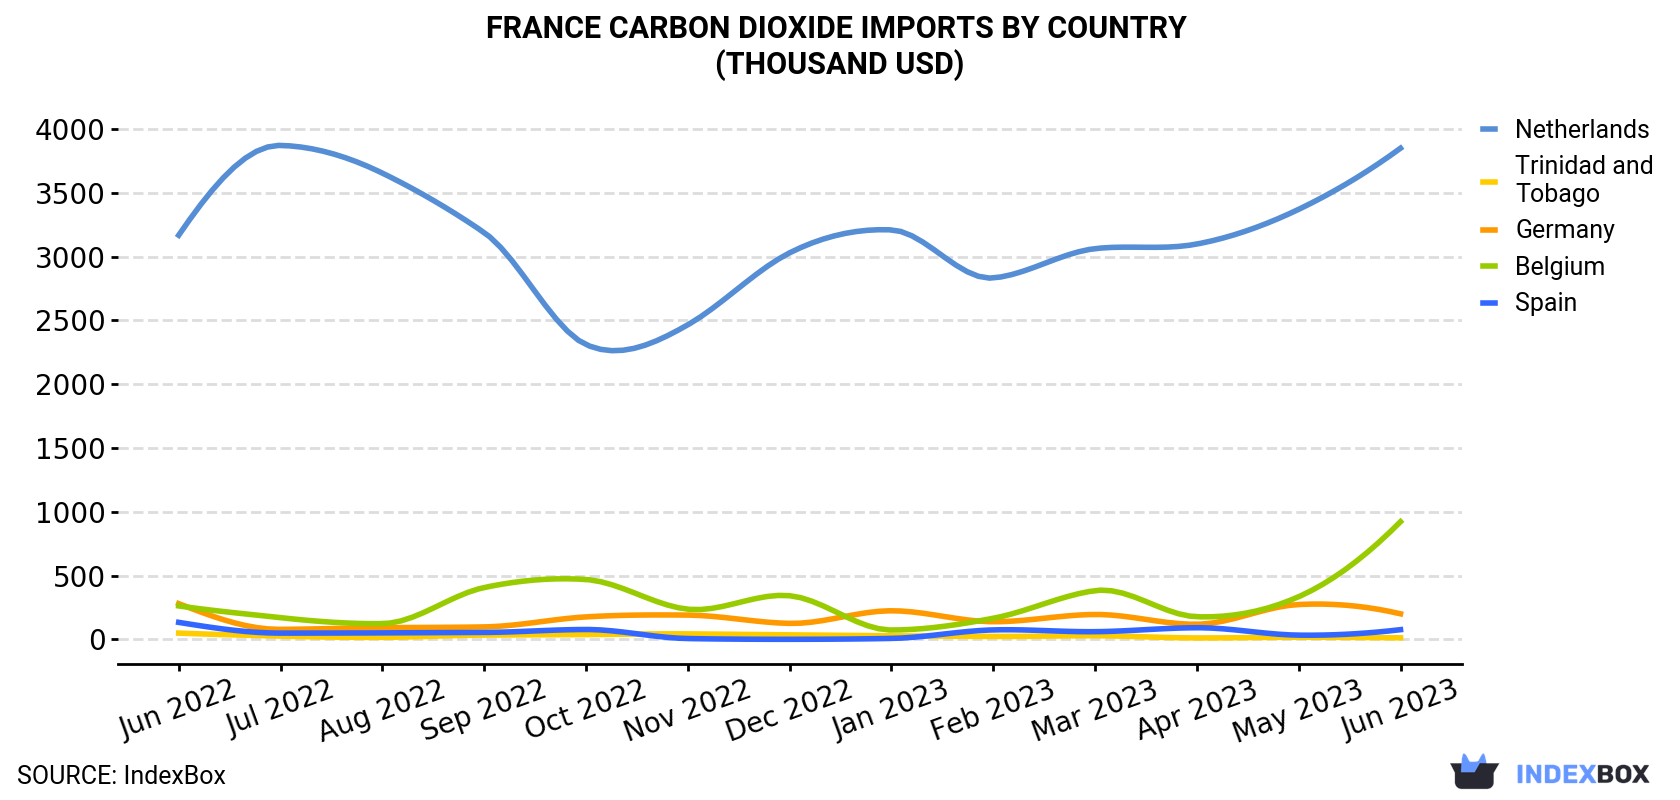 France Carbon Dioxide Imports By Country (Thousand USD)